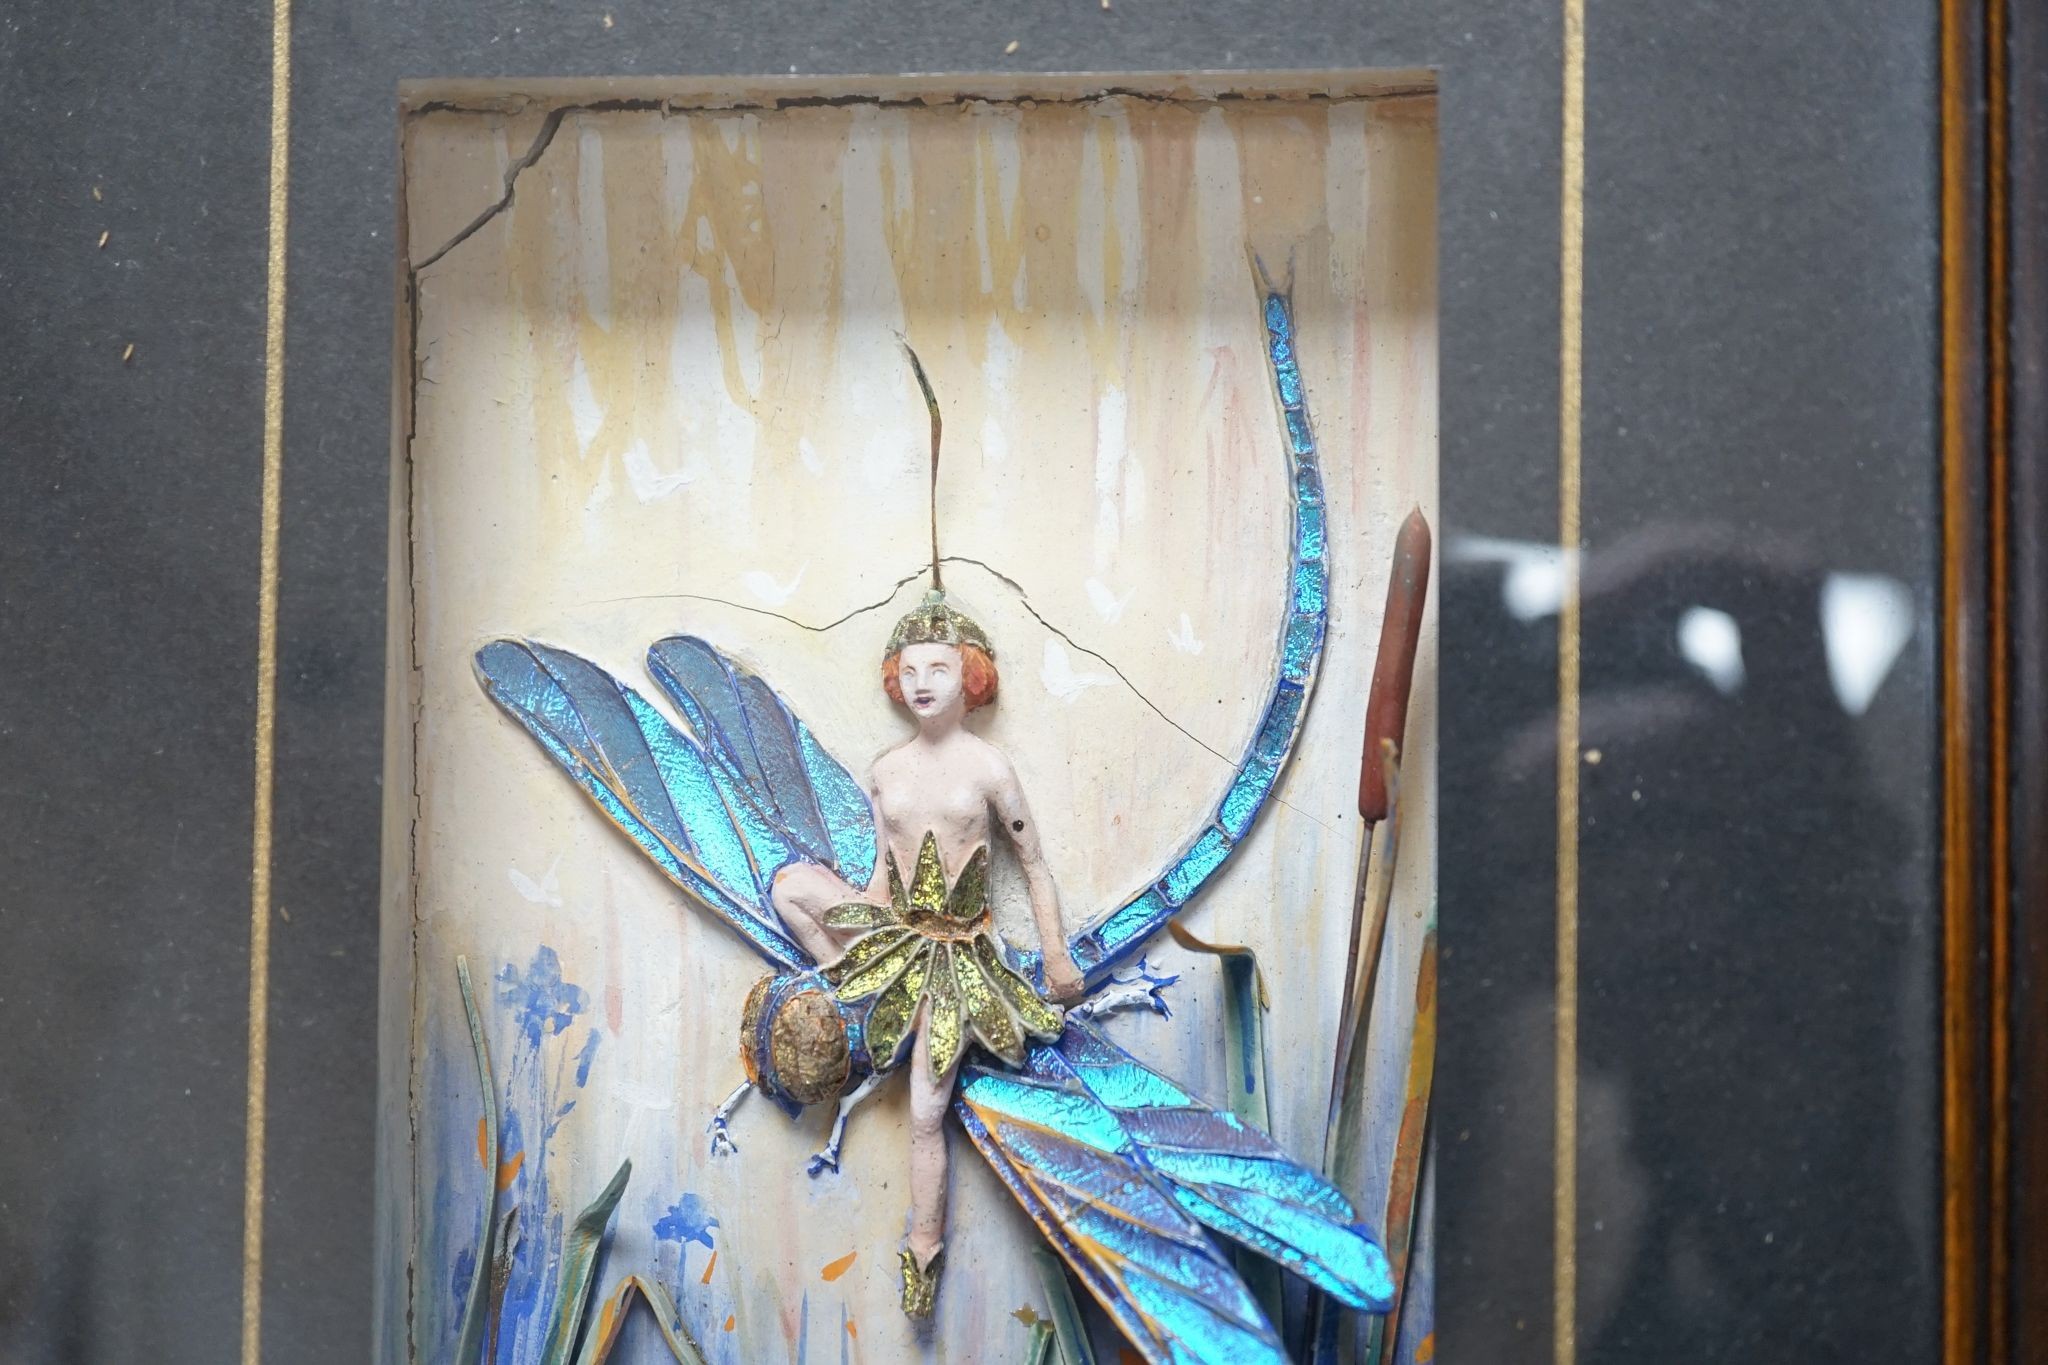 A pair of morpho butterfly wing nymph diorama, signed Gaydon King, Pat. App. For 19907/29, c. - Image 4 of 7